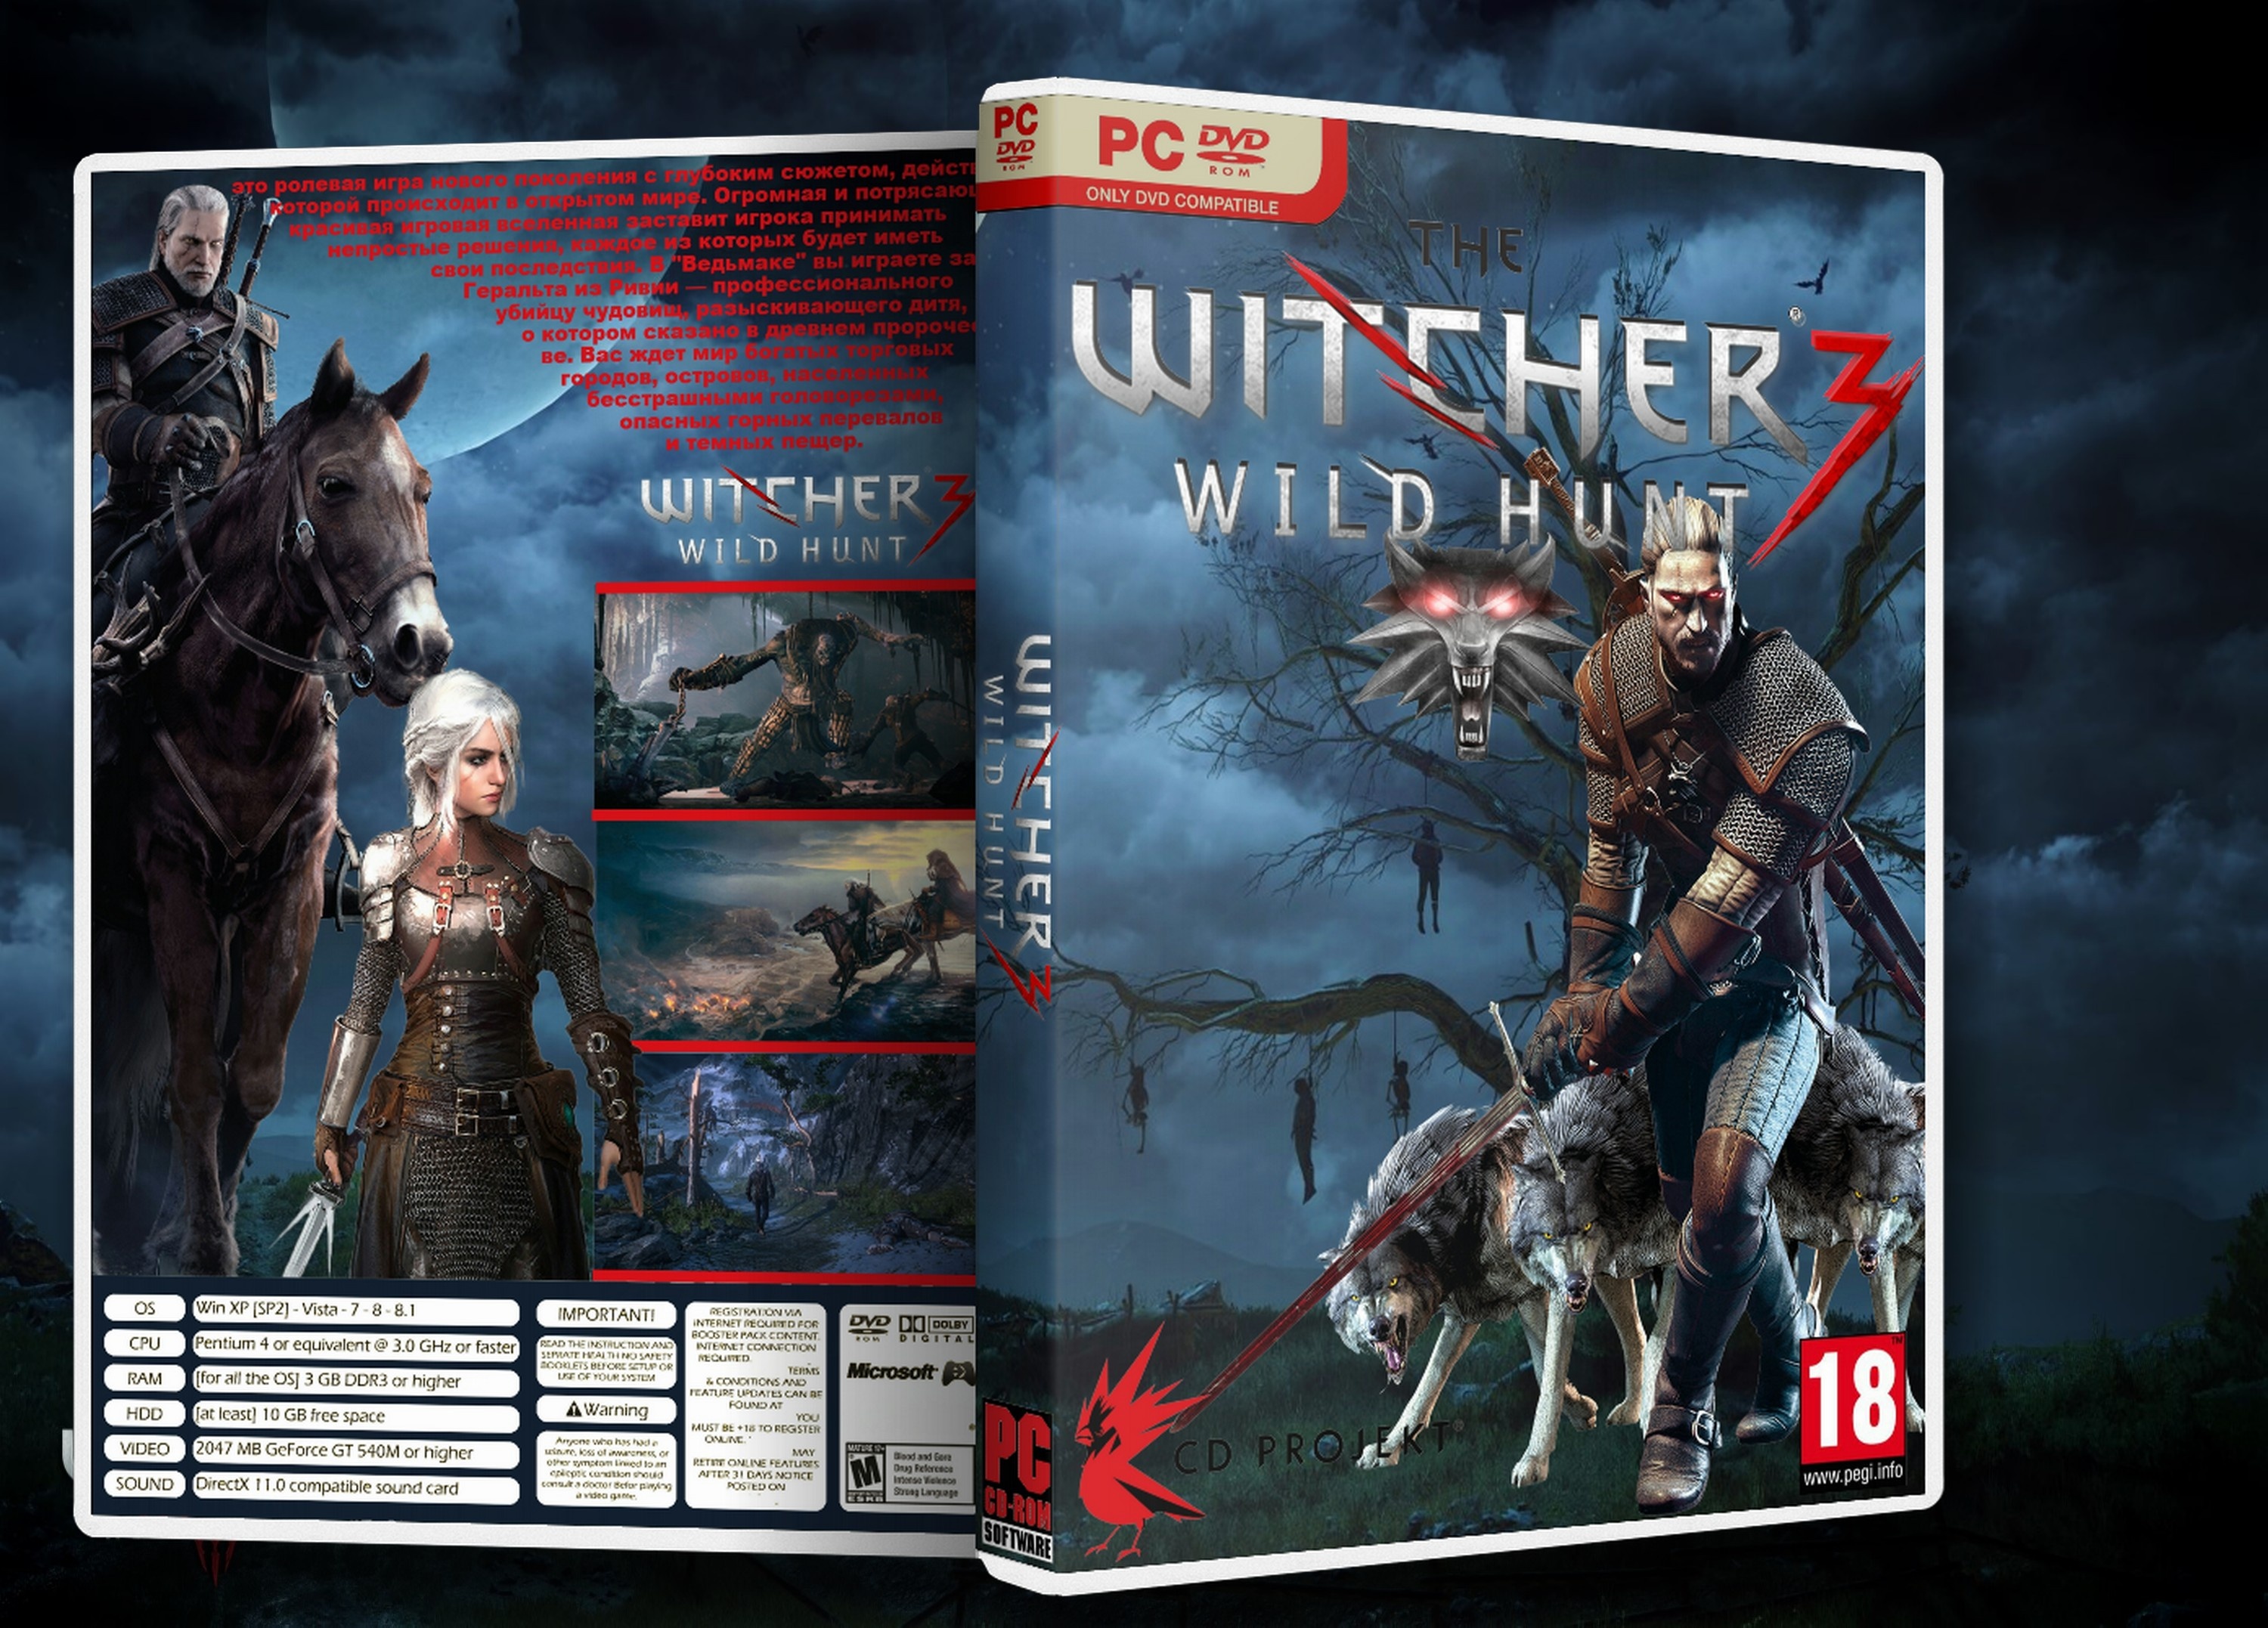 Witcher 3: Wild hunt box cover